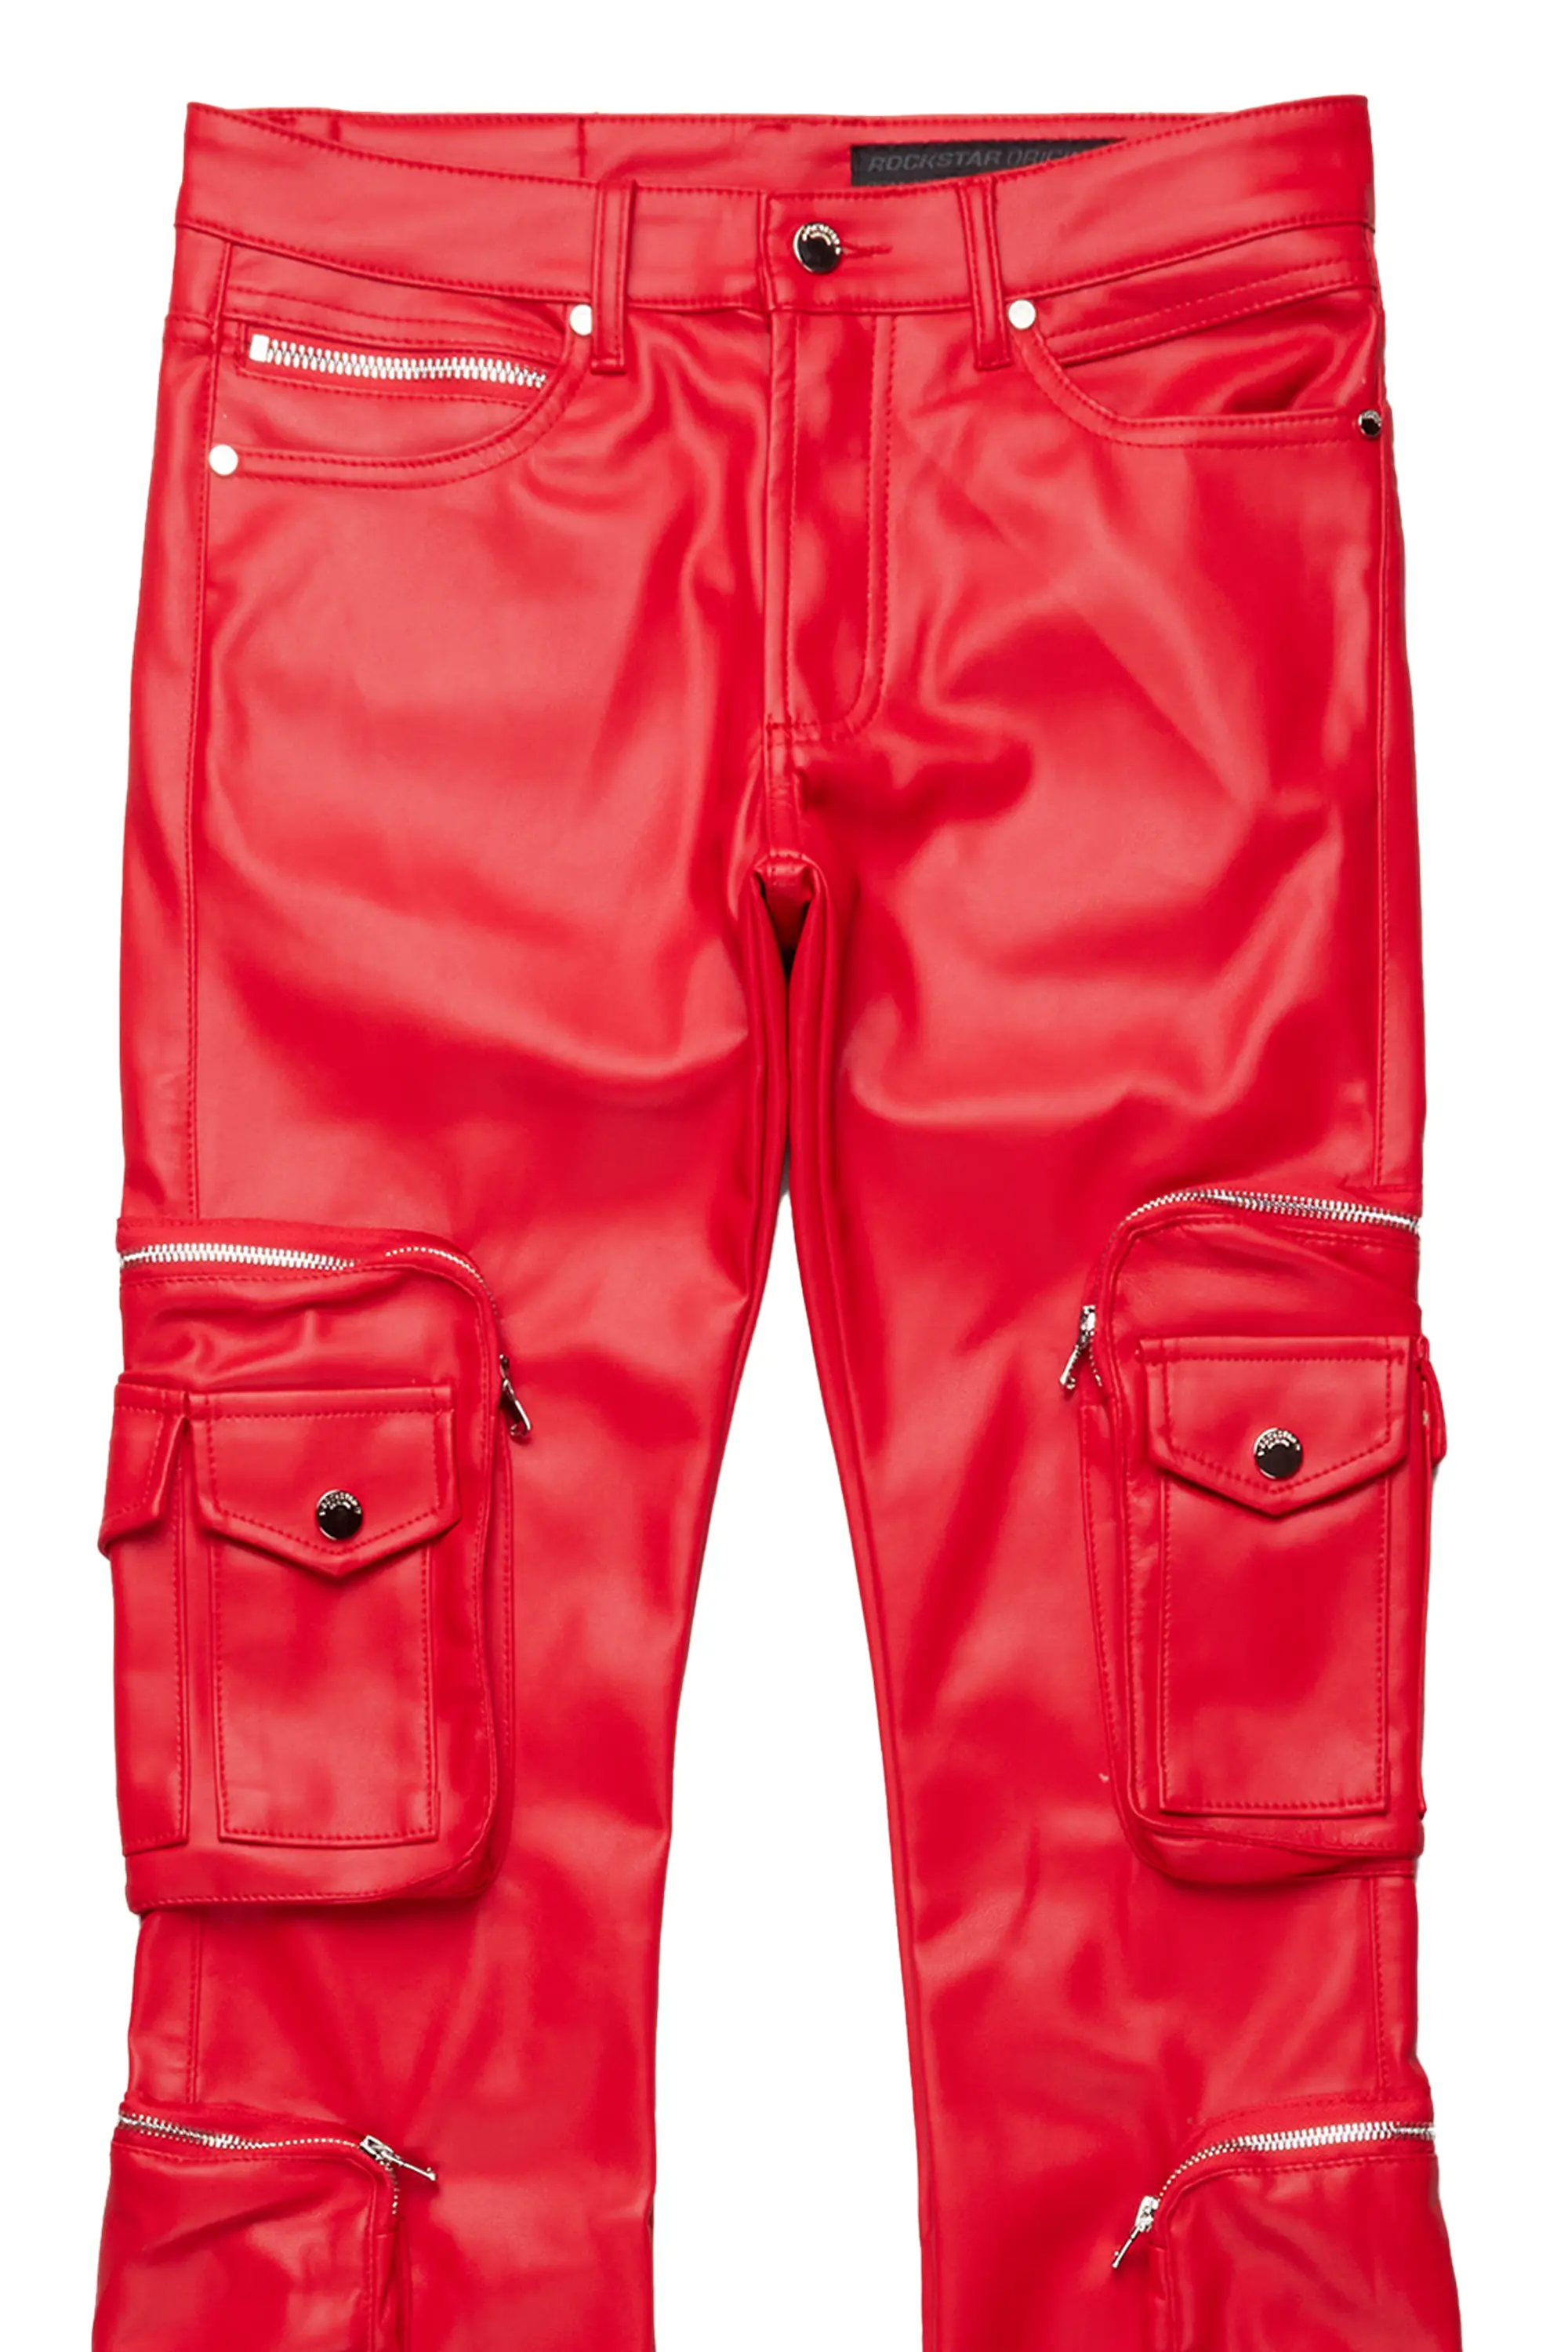 Red Lederhosen High Waist Faux Leather Faux Leather Pants Women For Women  Slim Elasticity, Fashionable Three Button Design, Skinny Jeans For Femme  From Missher, $20.16 | DHgate.Com